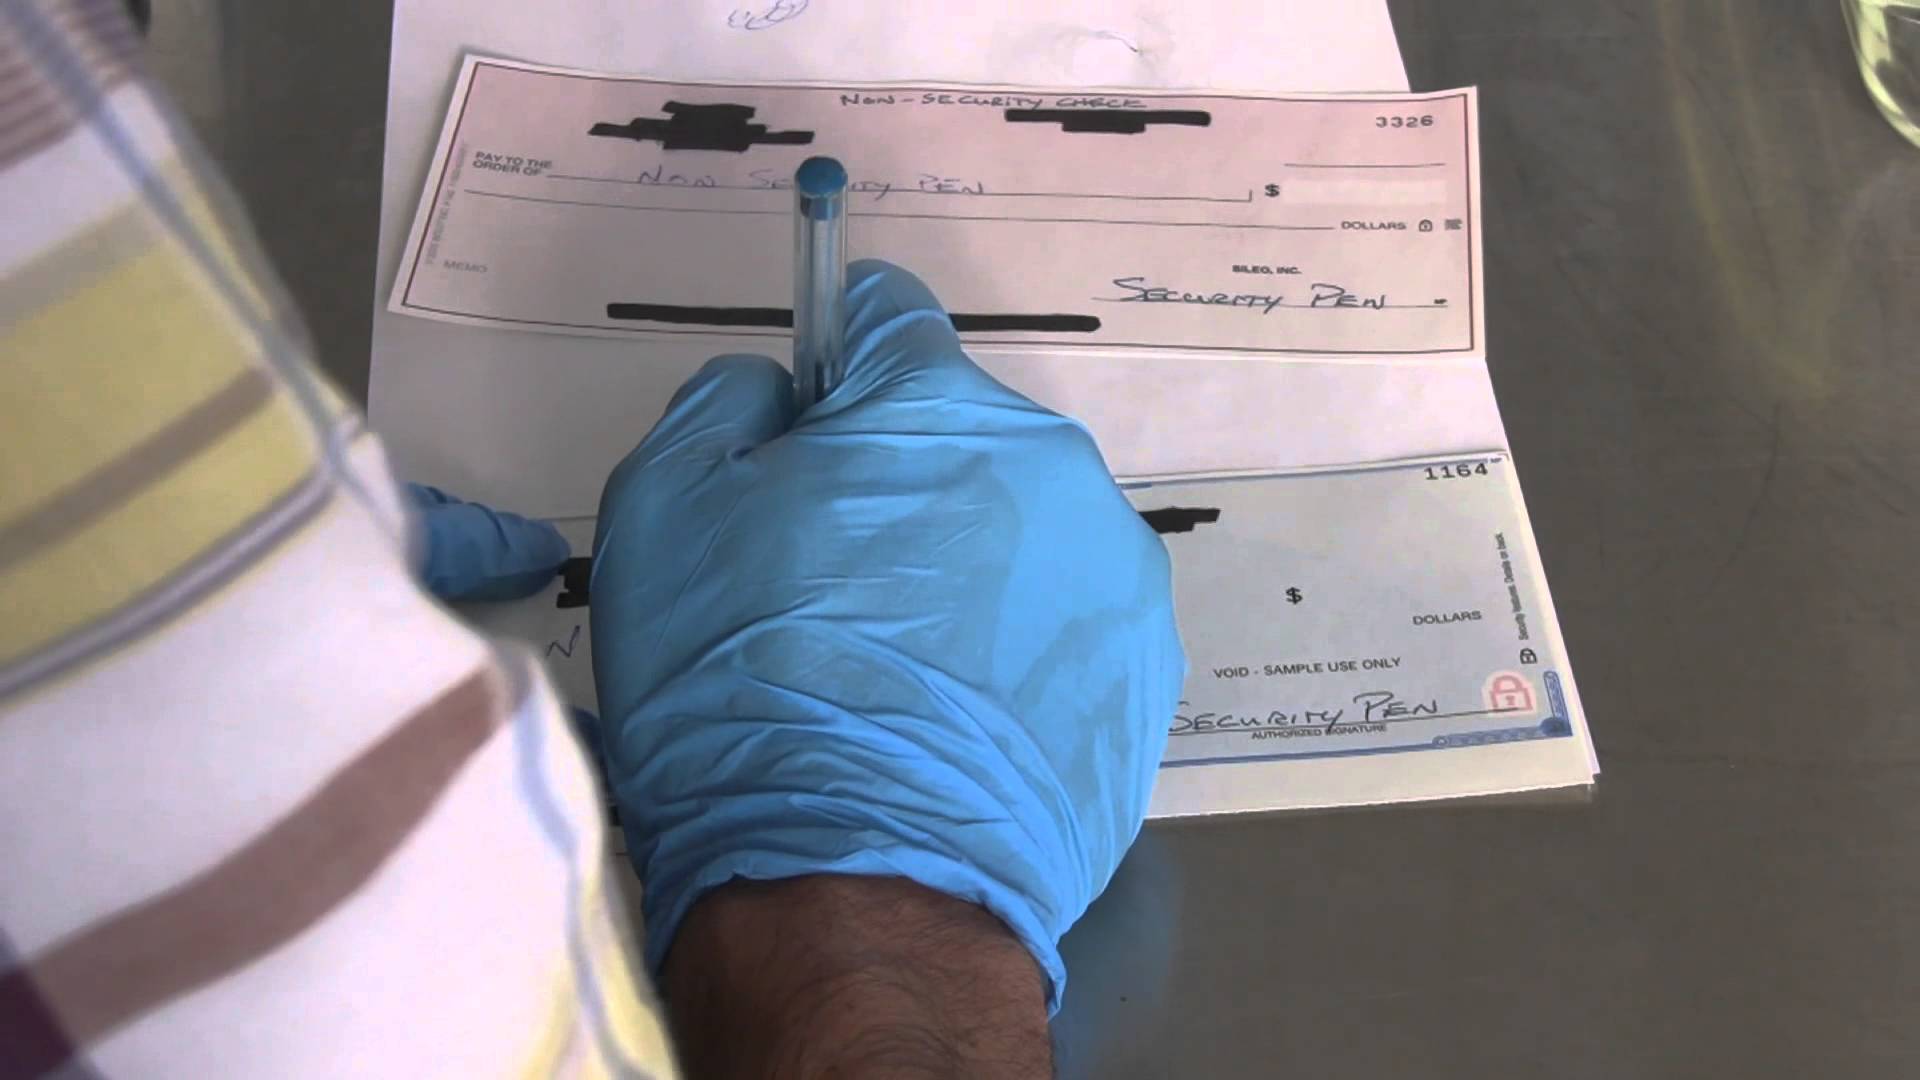 Material alterations to a Cheque